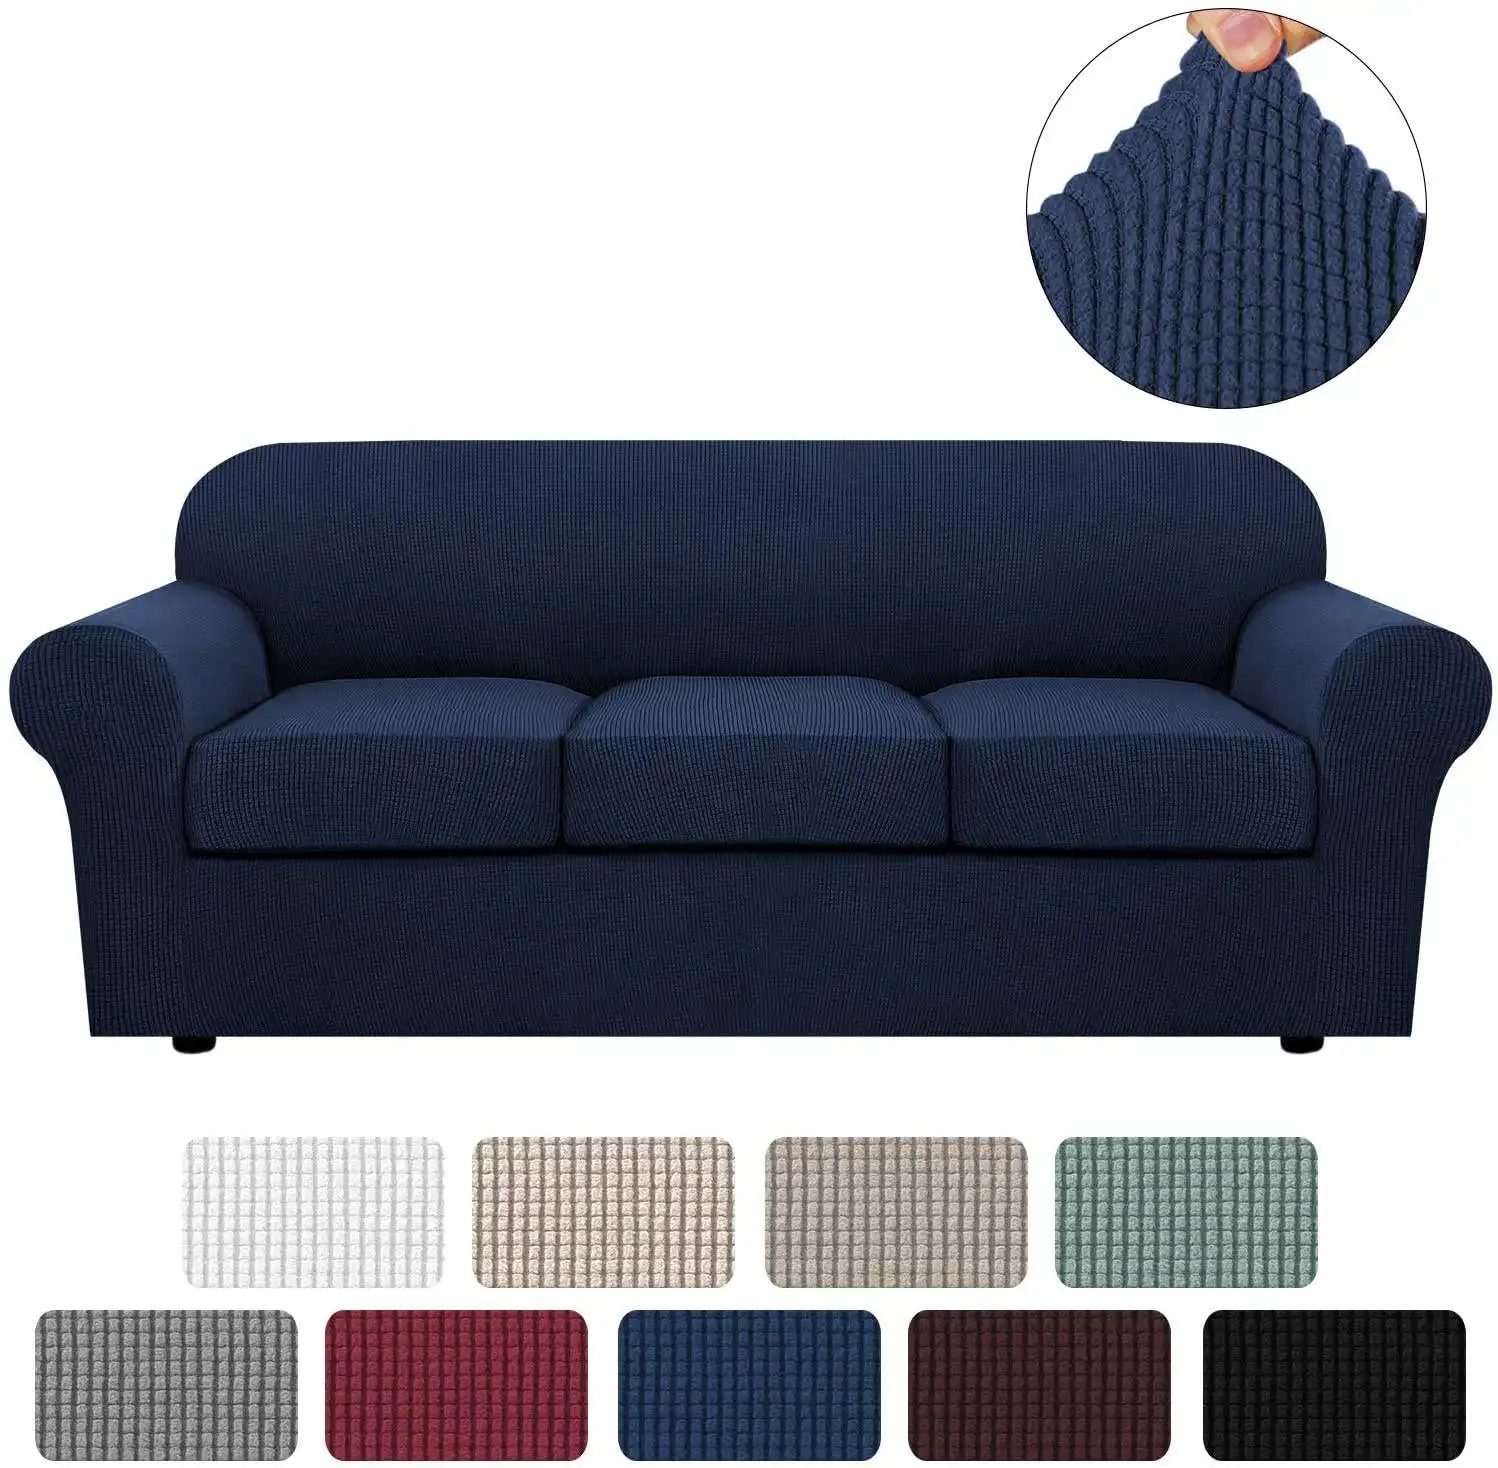 OEM/ODM Hot Sale 4 Pieces Elastic Jacquard stretch sofa cover 3 seats 3 Seaters Sofa sofar cover for sofa couch slipcover